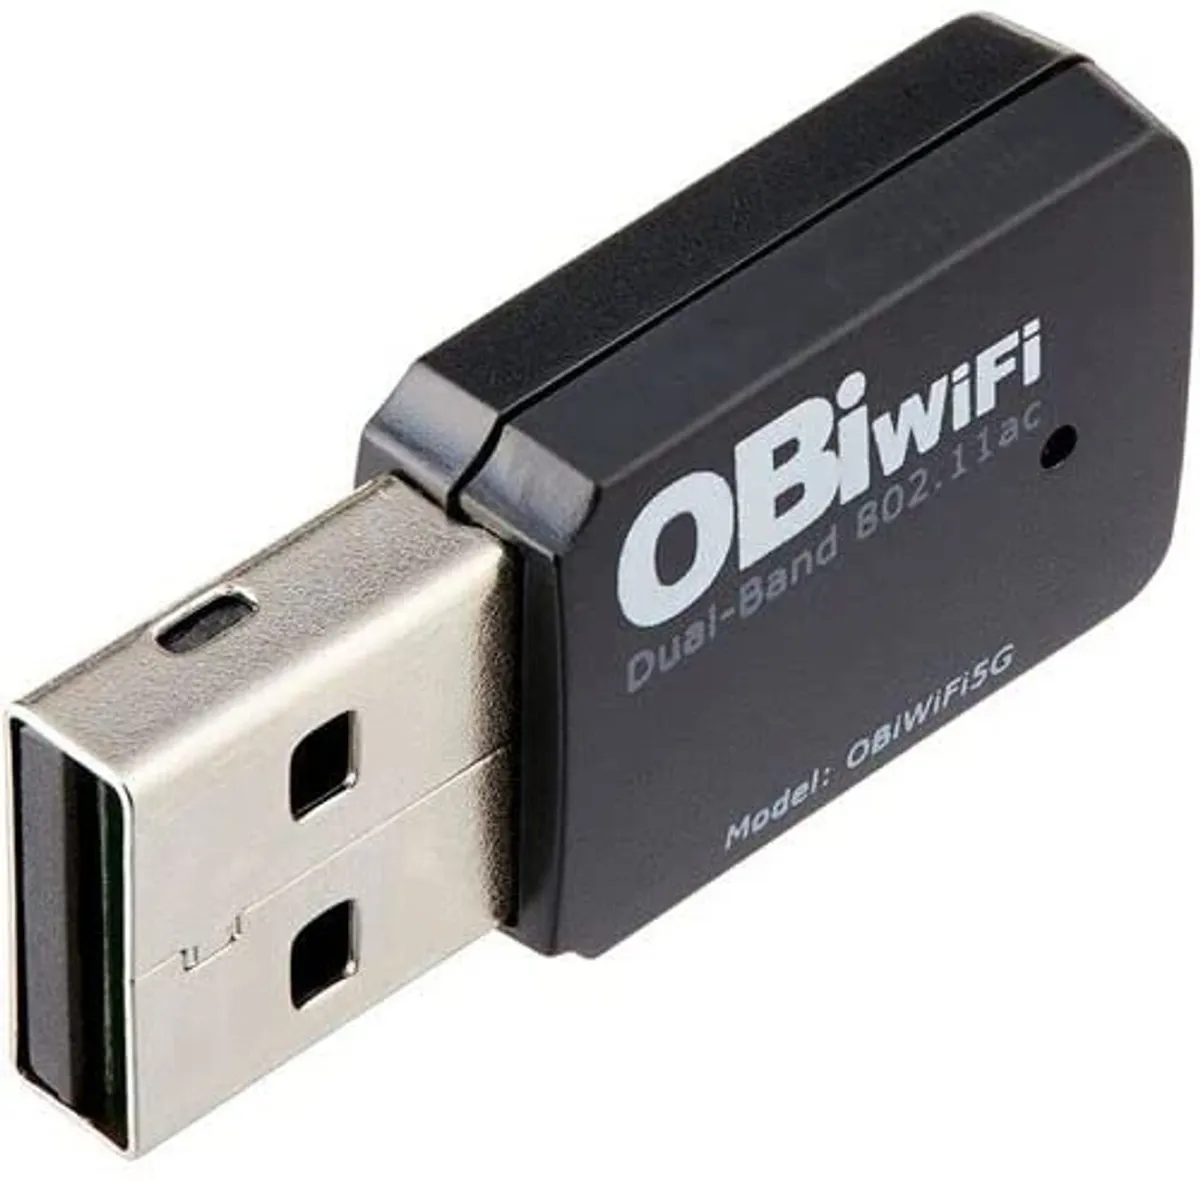 poly obiwifi usb adapter icon view